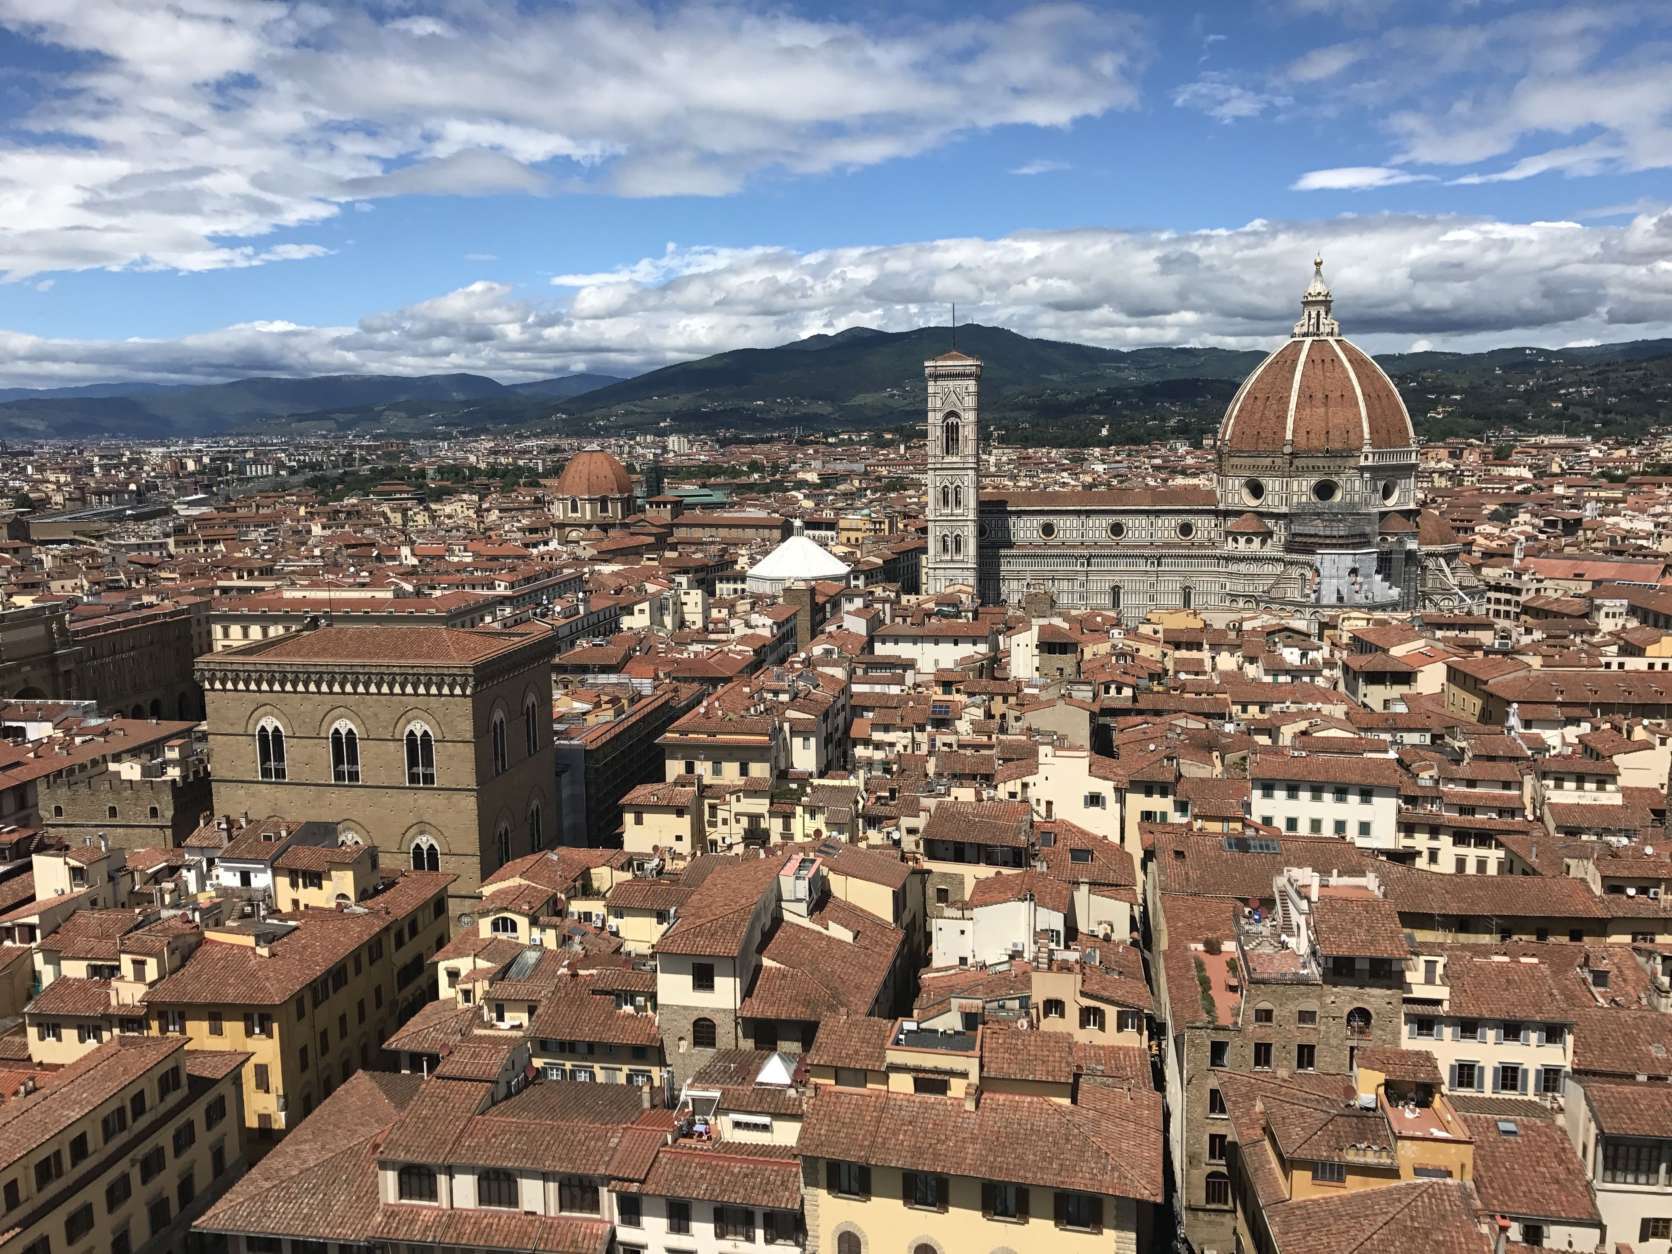 In this May 9, 2017 photo, climbing the tower of the Palazzo Vecchio in Florence, Italy, offers stunning views as seen here. Found next to the Uffizi Gallery in the famed Piazza della Signoria, the Palazzo Vecchio features a foundation of Roman ruins, palatial rooms and a replica of Michelangelo's David out front. (AP Photo/Courtney Bonnell)